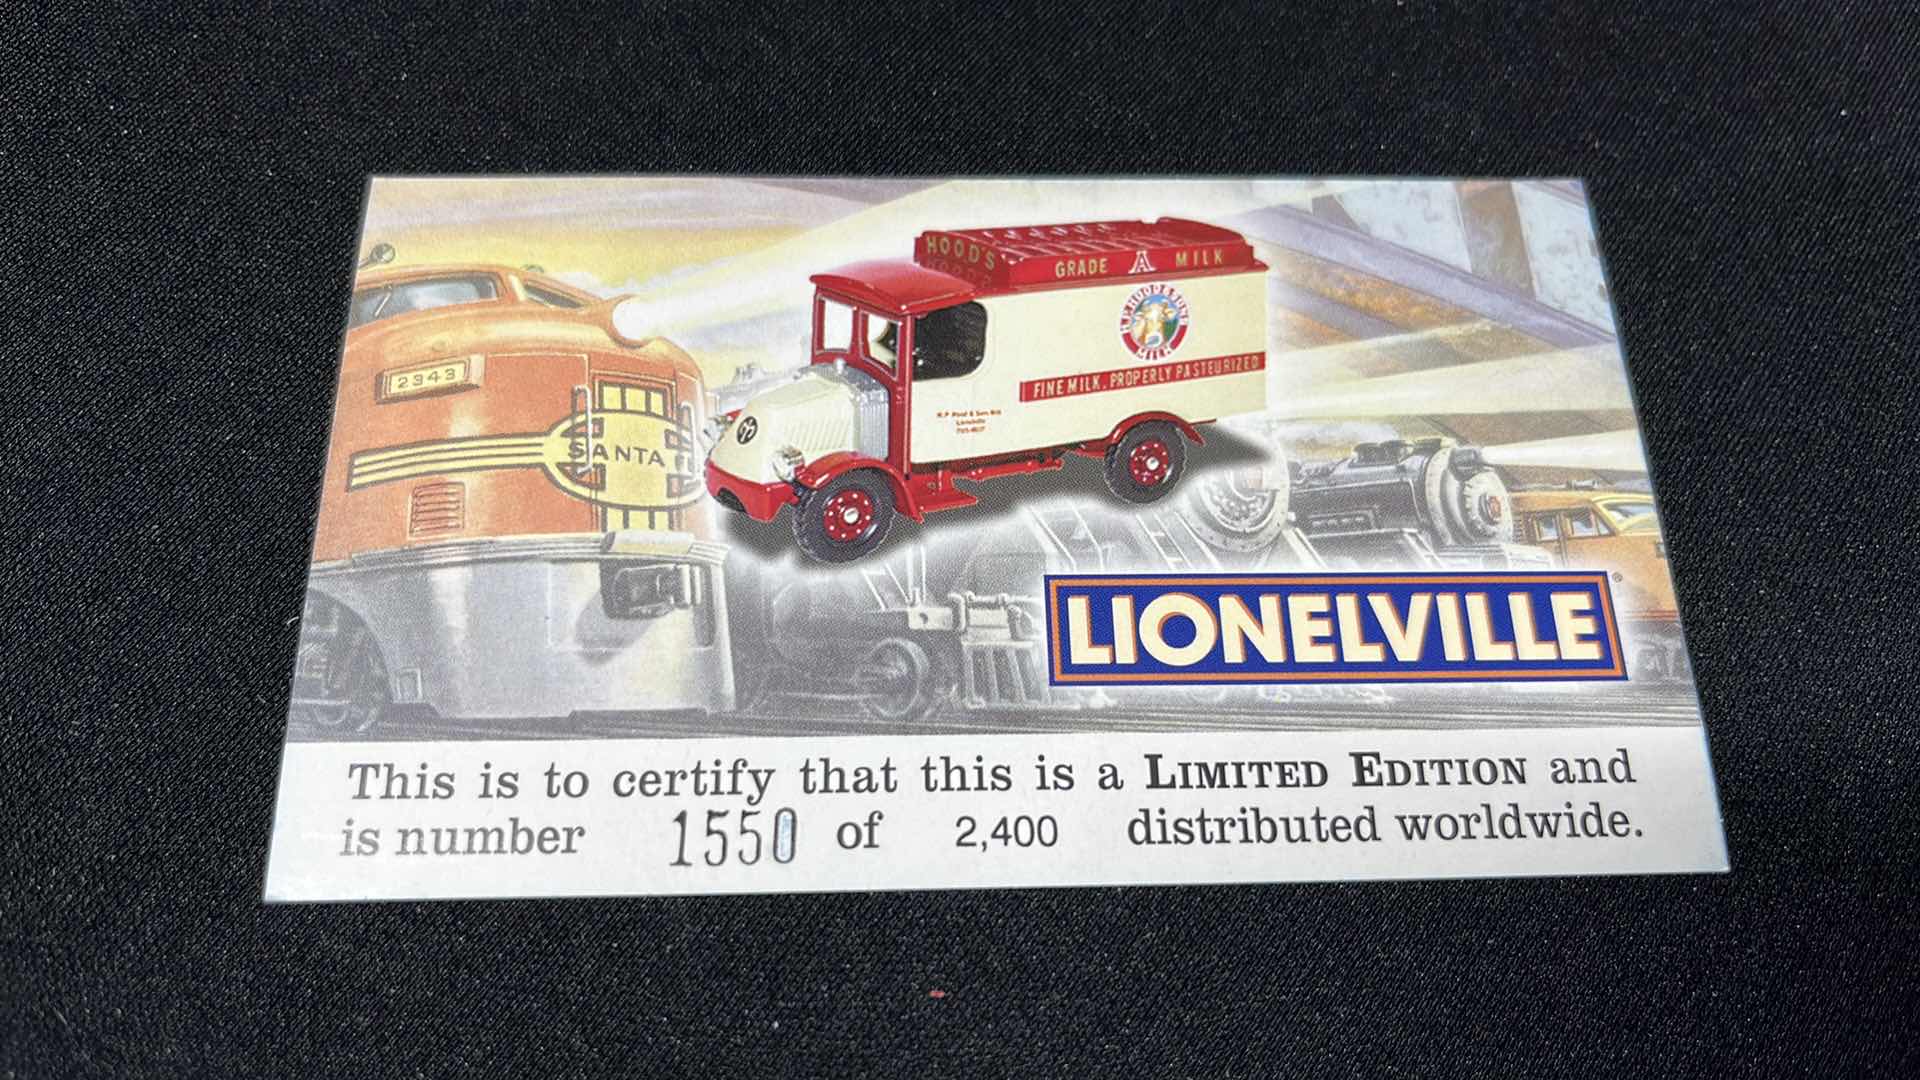 Photo 7 of CORGI CLASSICS INC, LIONELVILLE LIMITED EDITION DIE-CAST REPLICA MACK AC DELIVERY TRUCK H.P. HOOD & SONS MILK US50602
$50